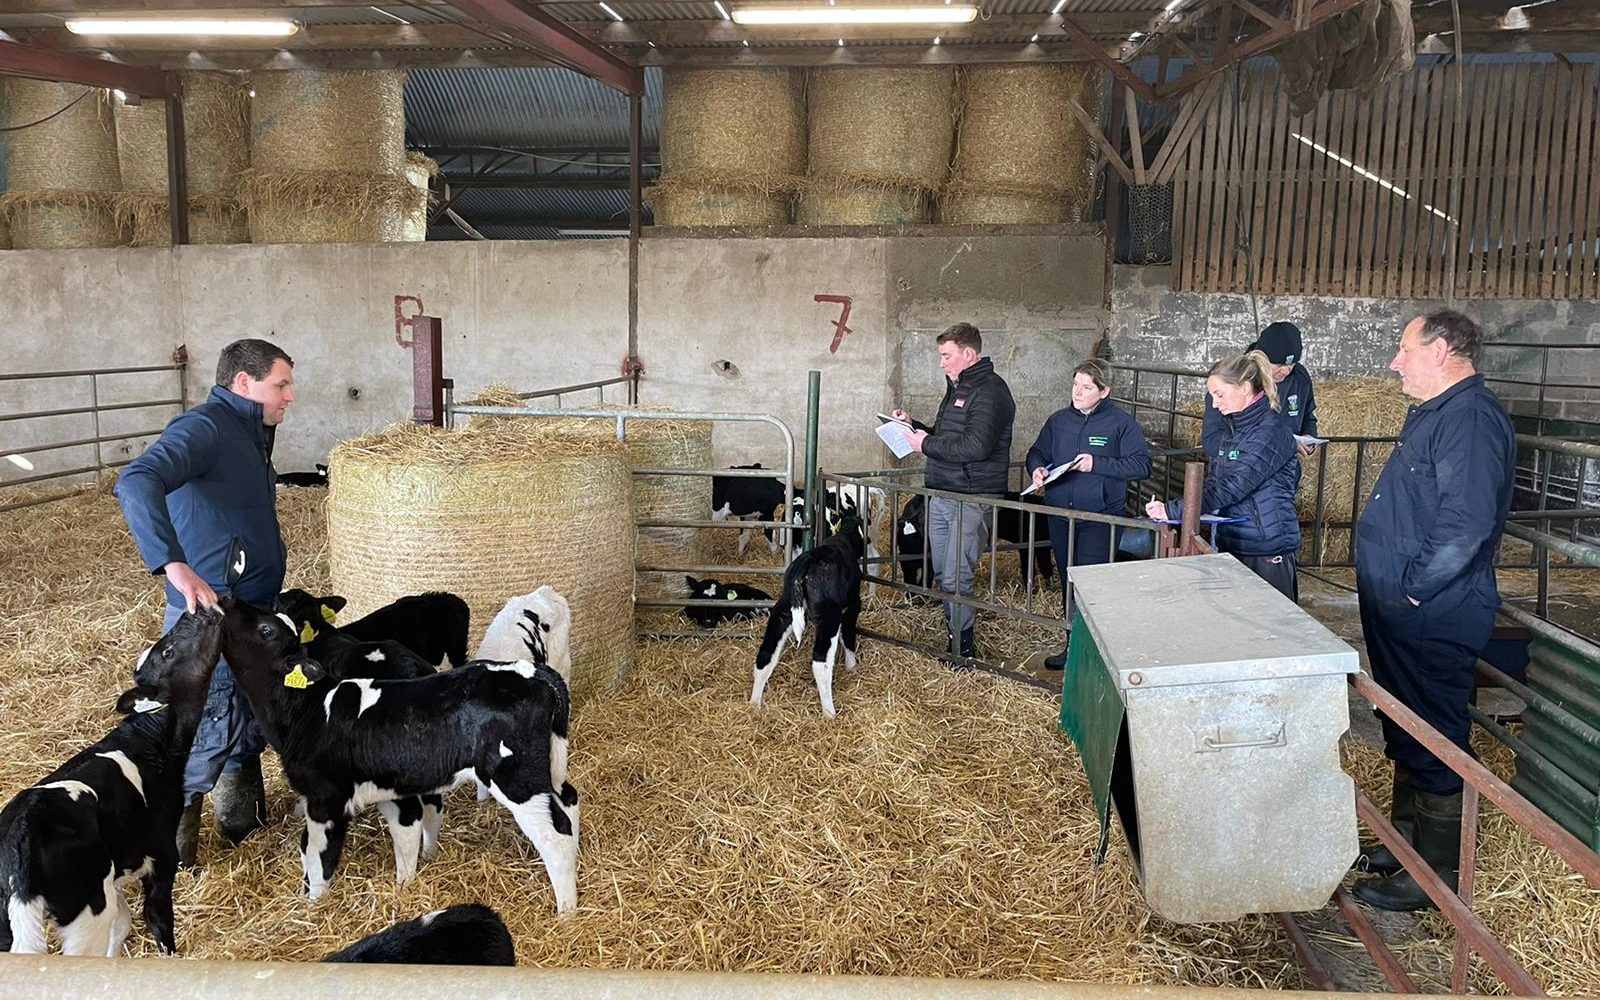 a group of people standing in a barn with cows